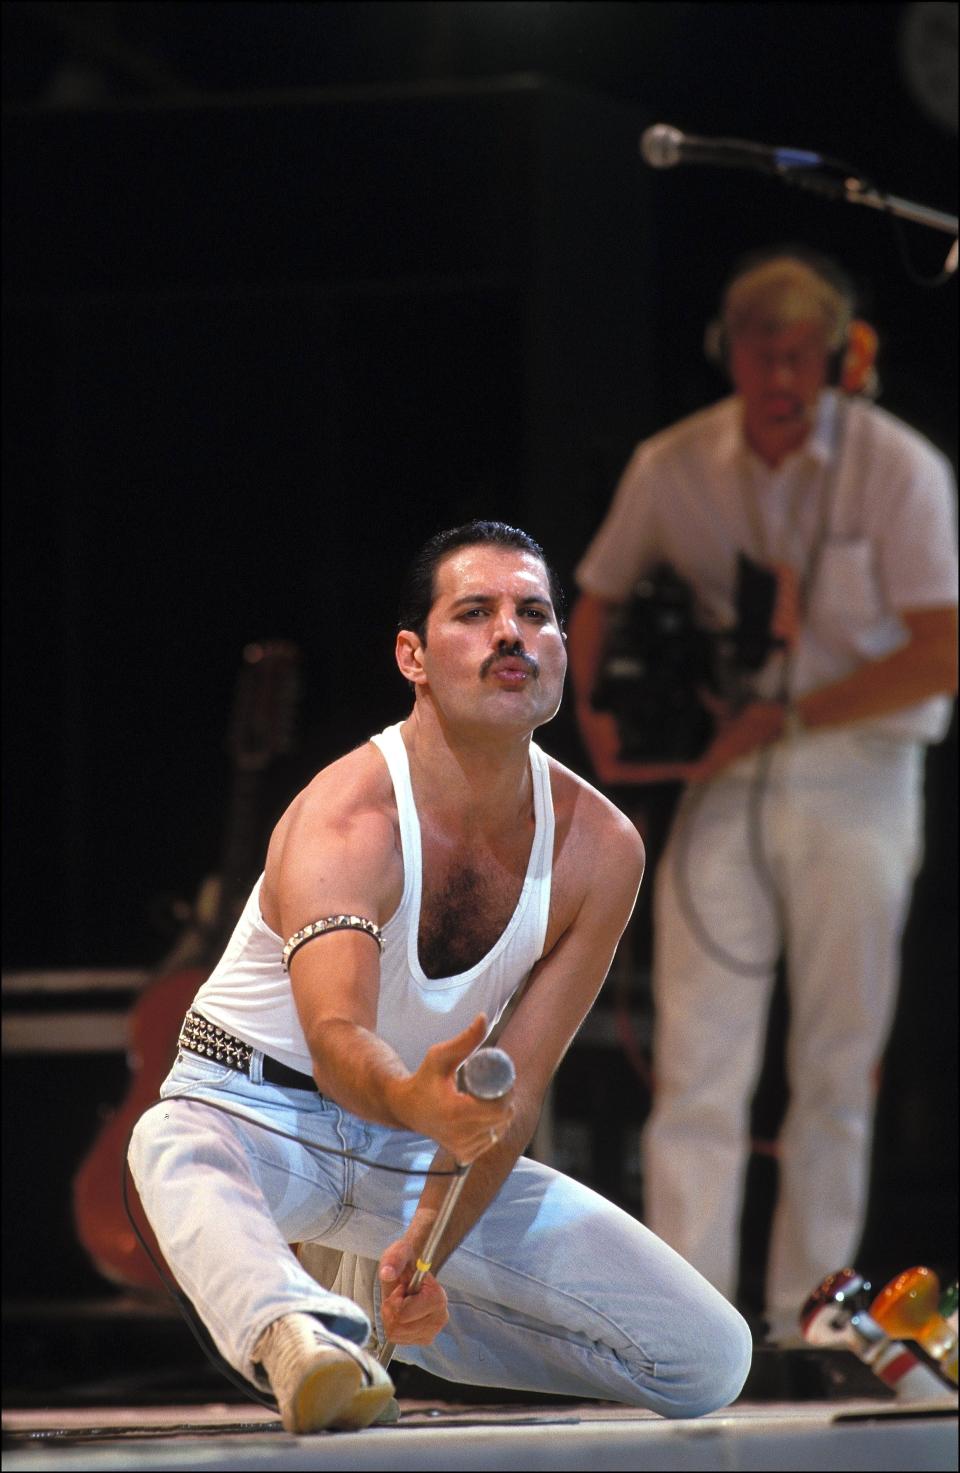 One of Freddie Mercury's final performance's with Queen was during Live Aid at Britain's Wembley Stadium in July 1985. The band stole the show in what is widely regarded as one of the best rock performances in history.